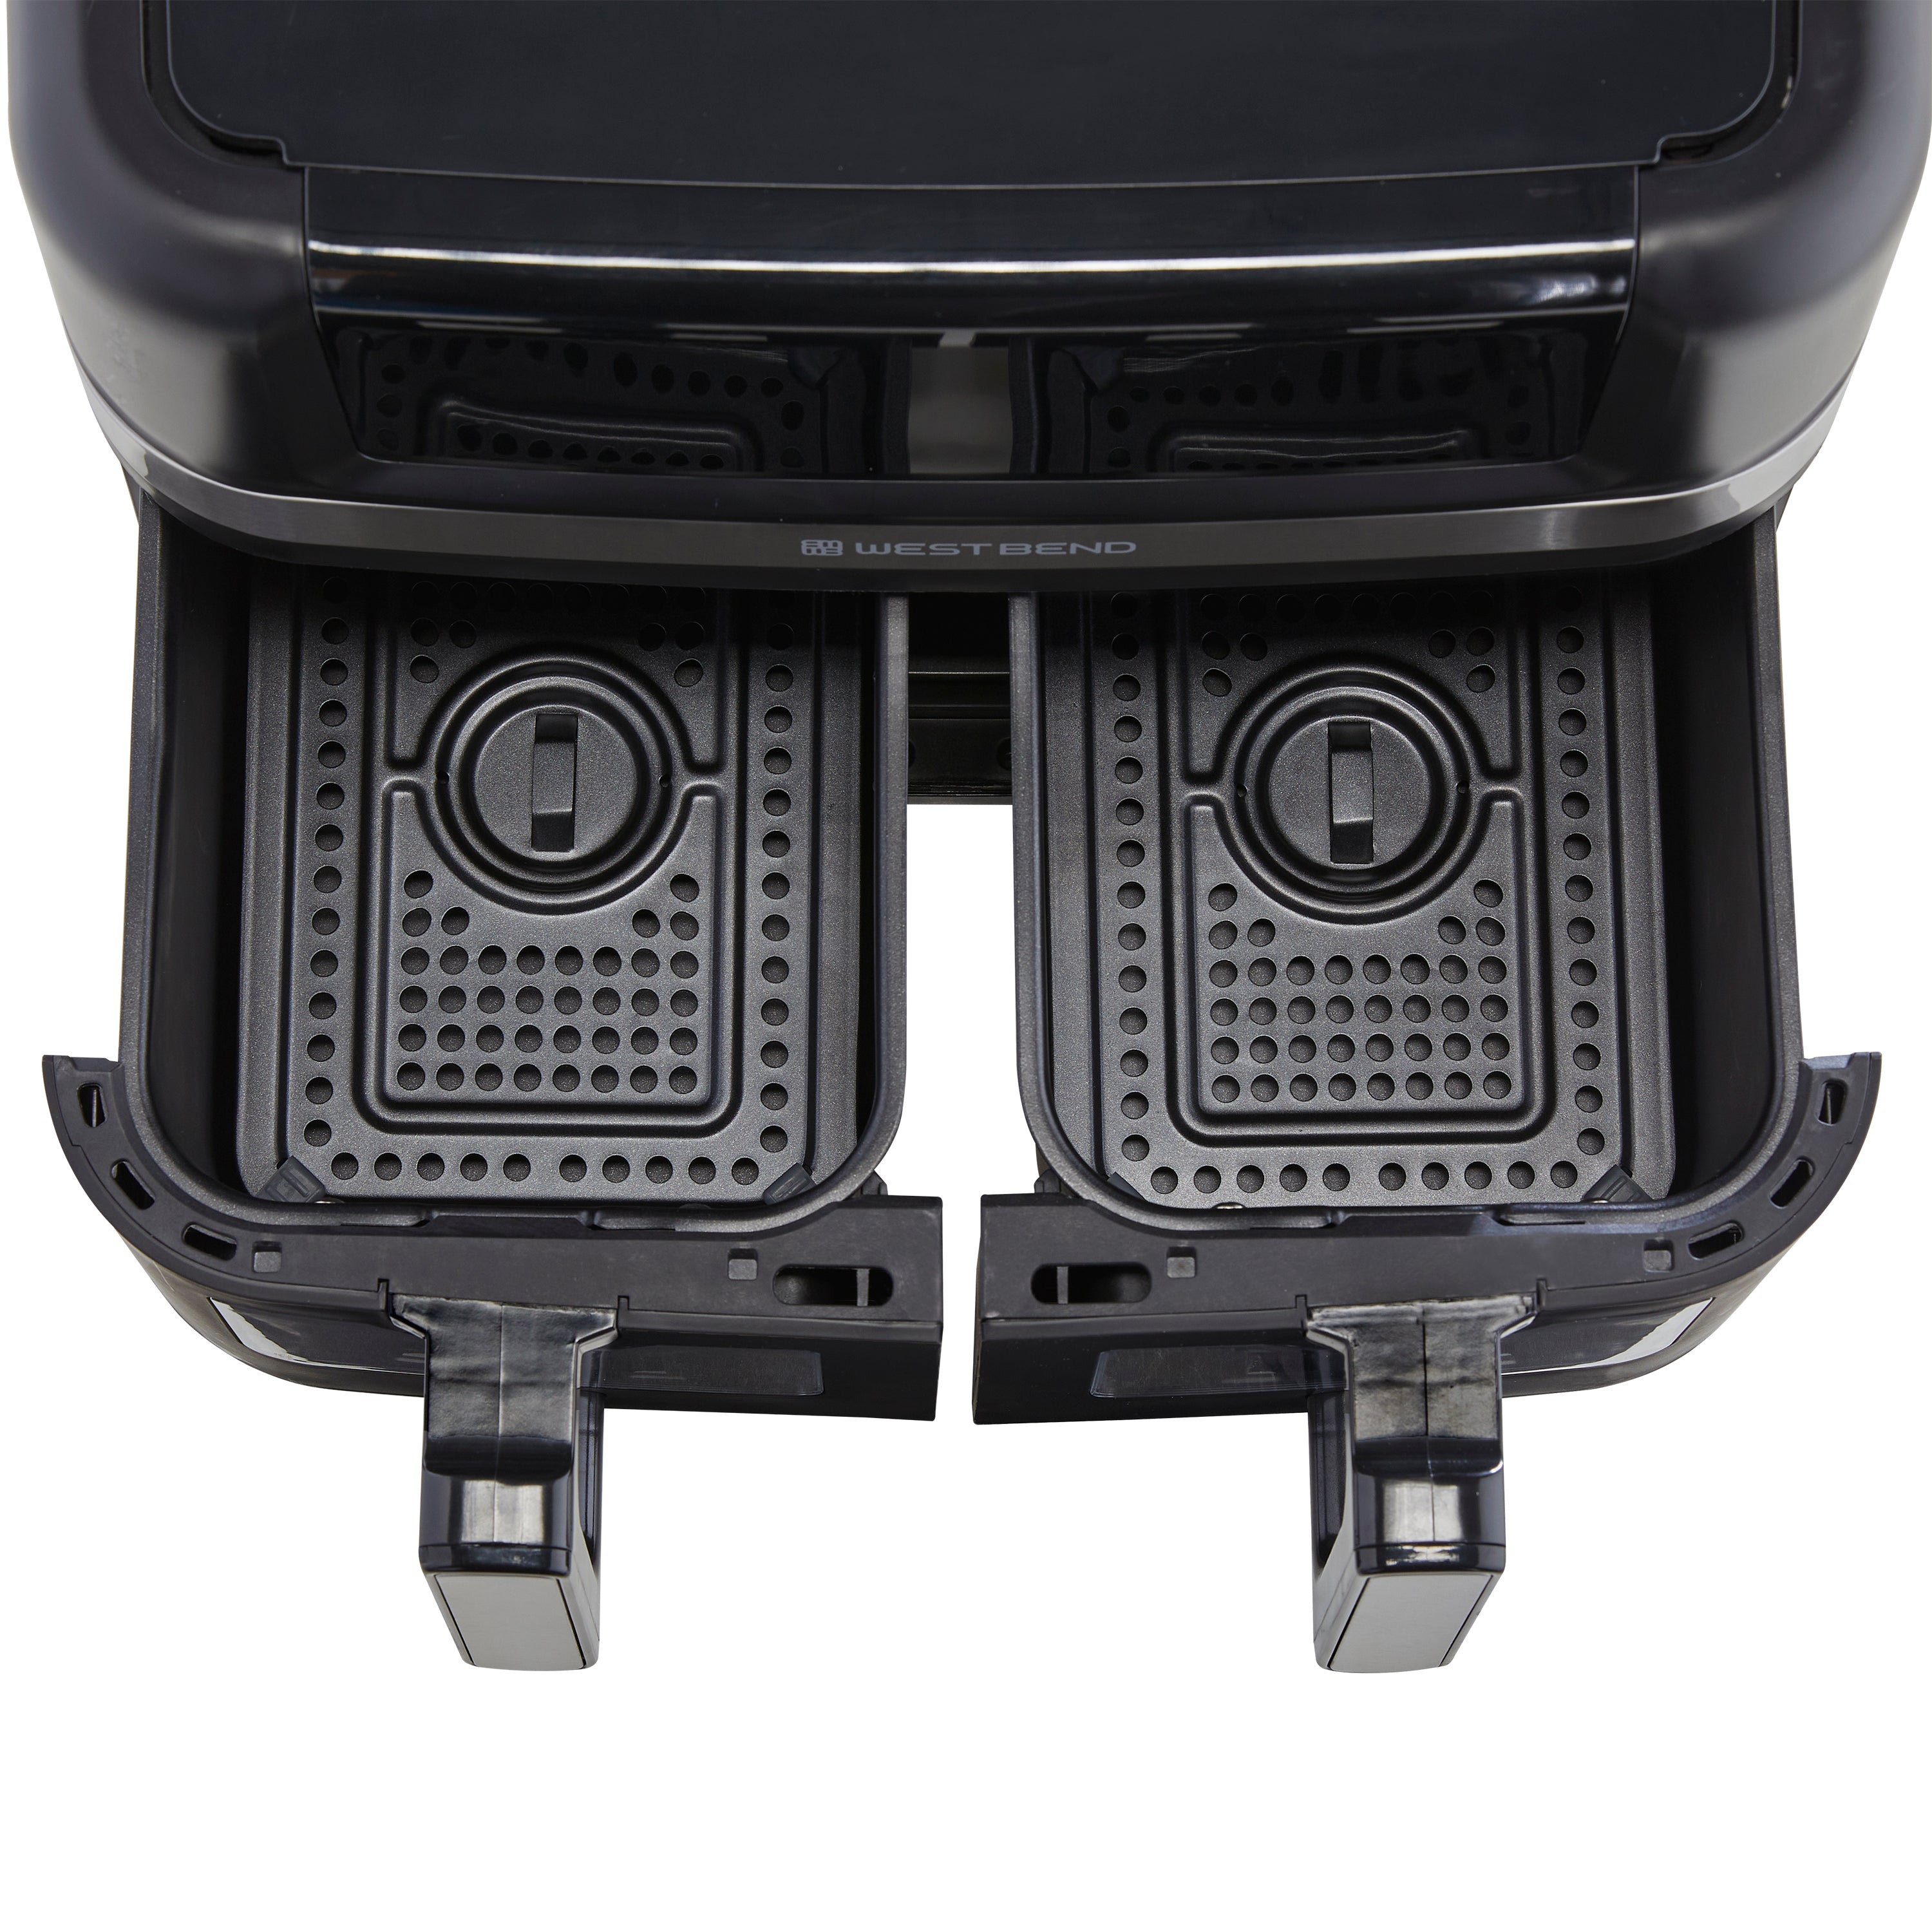 Dual Zone Feature Air Fryers at